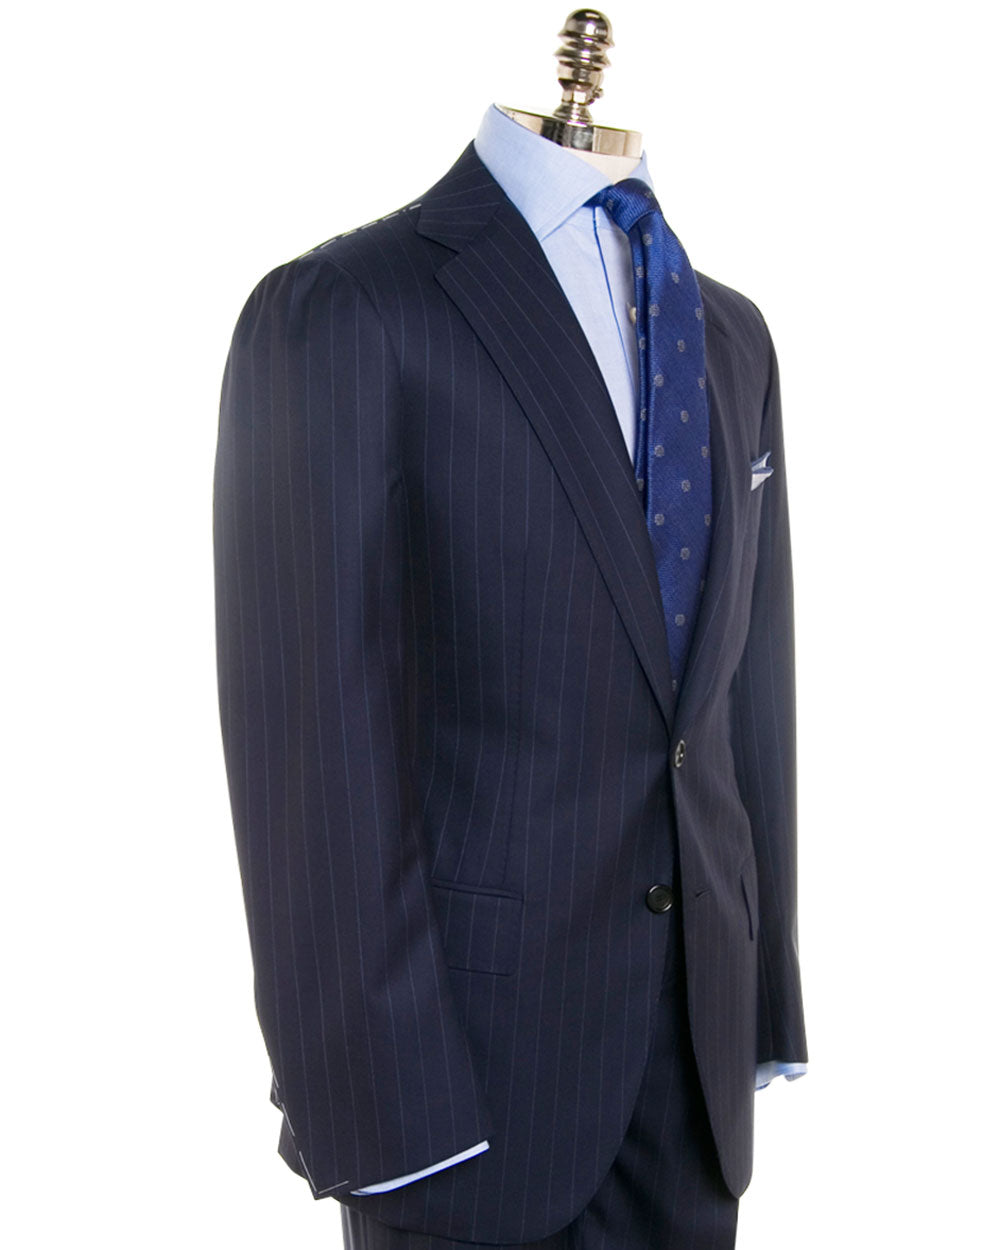 Navy with High Blue Pinstripe Suit